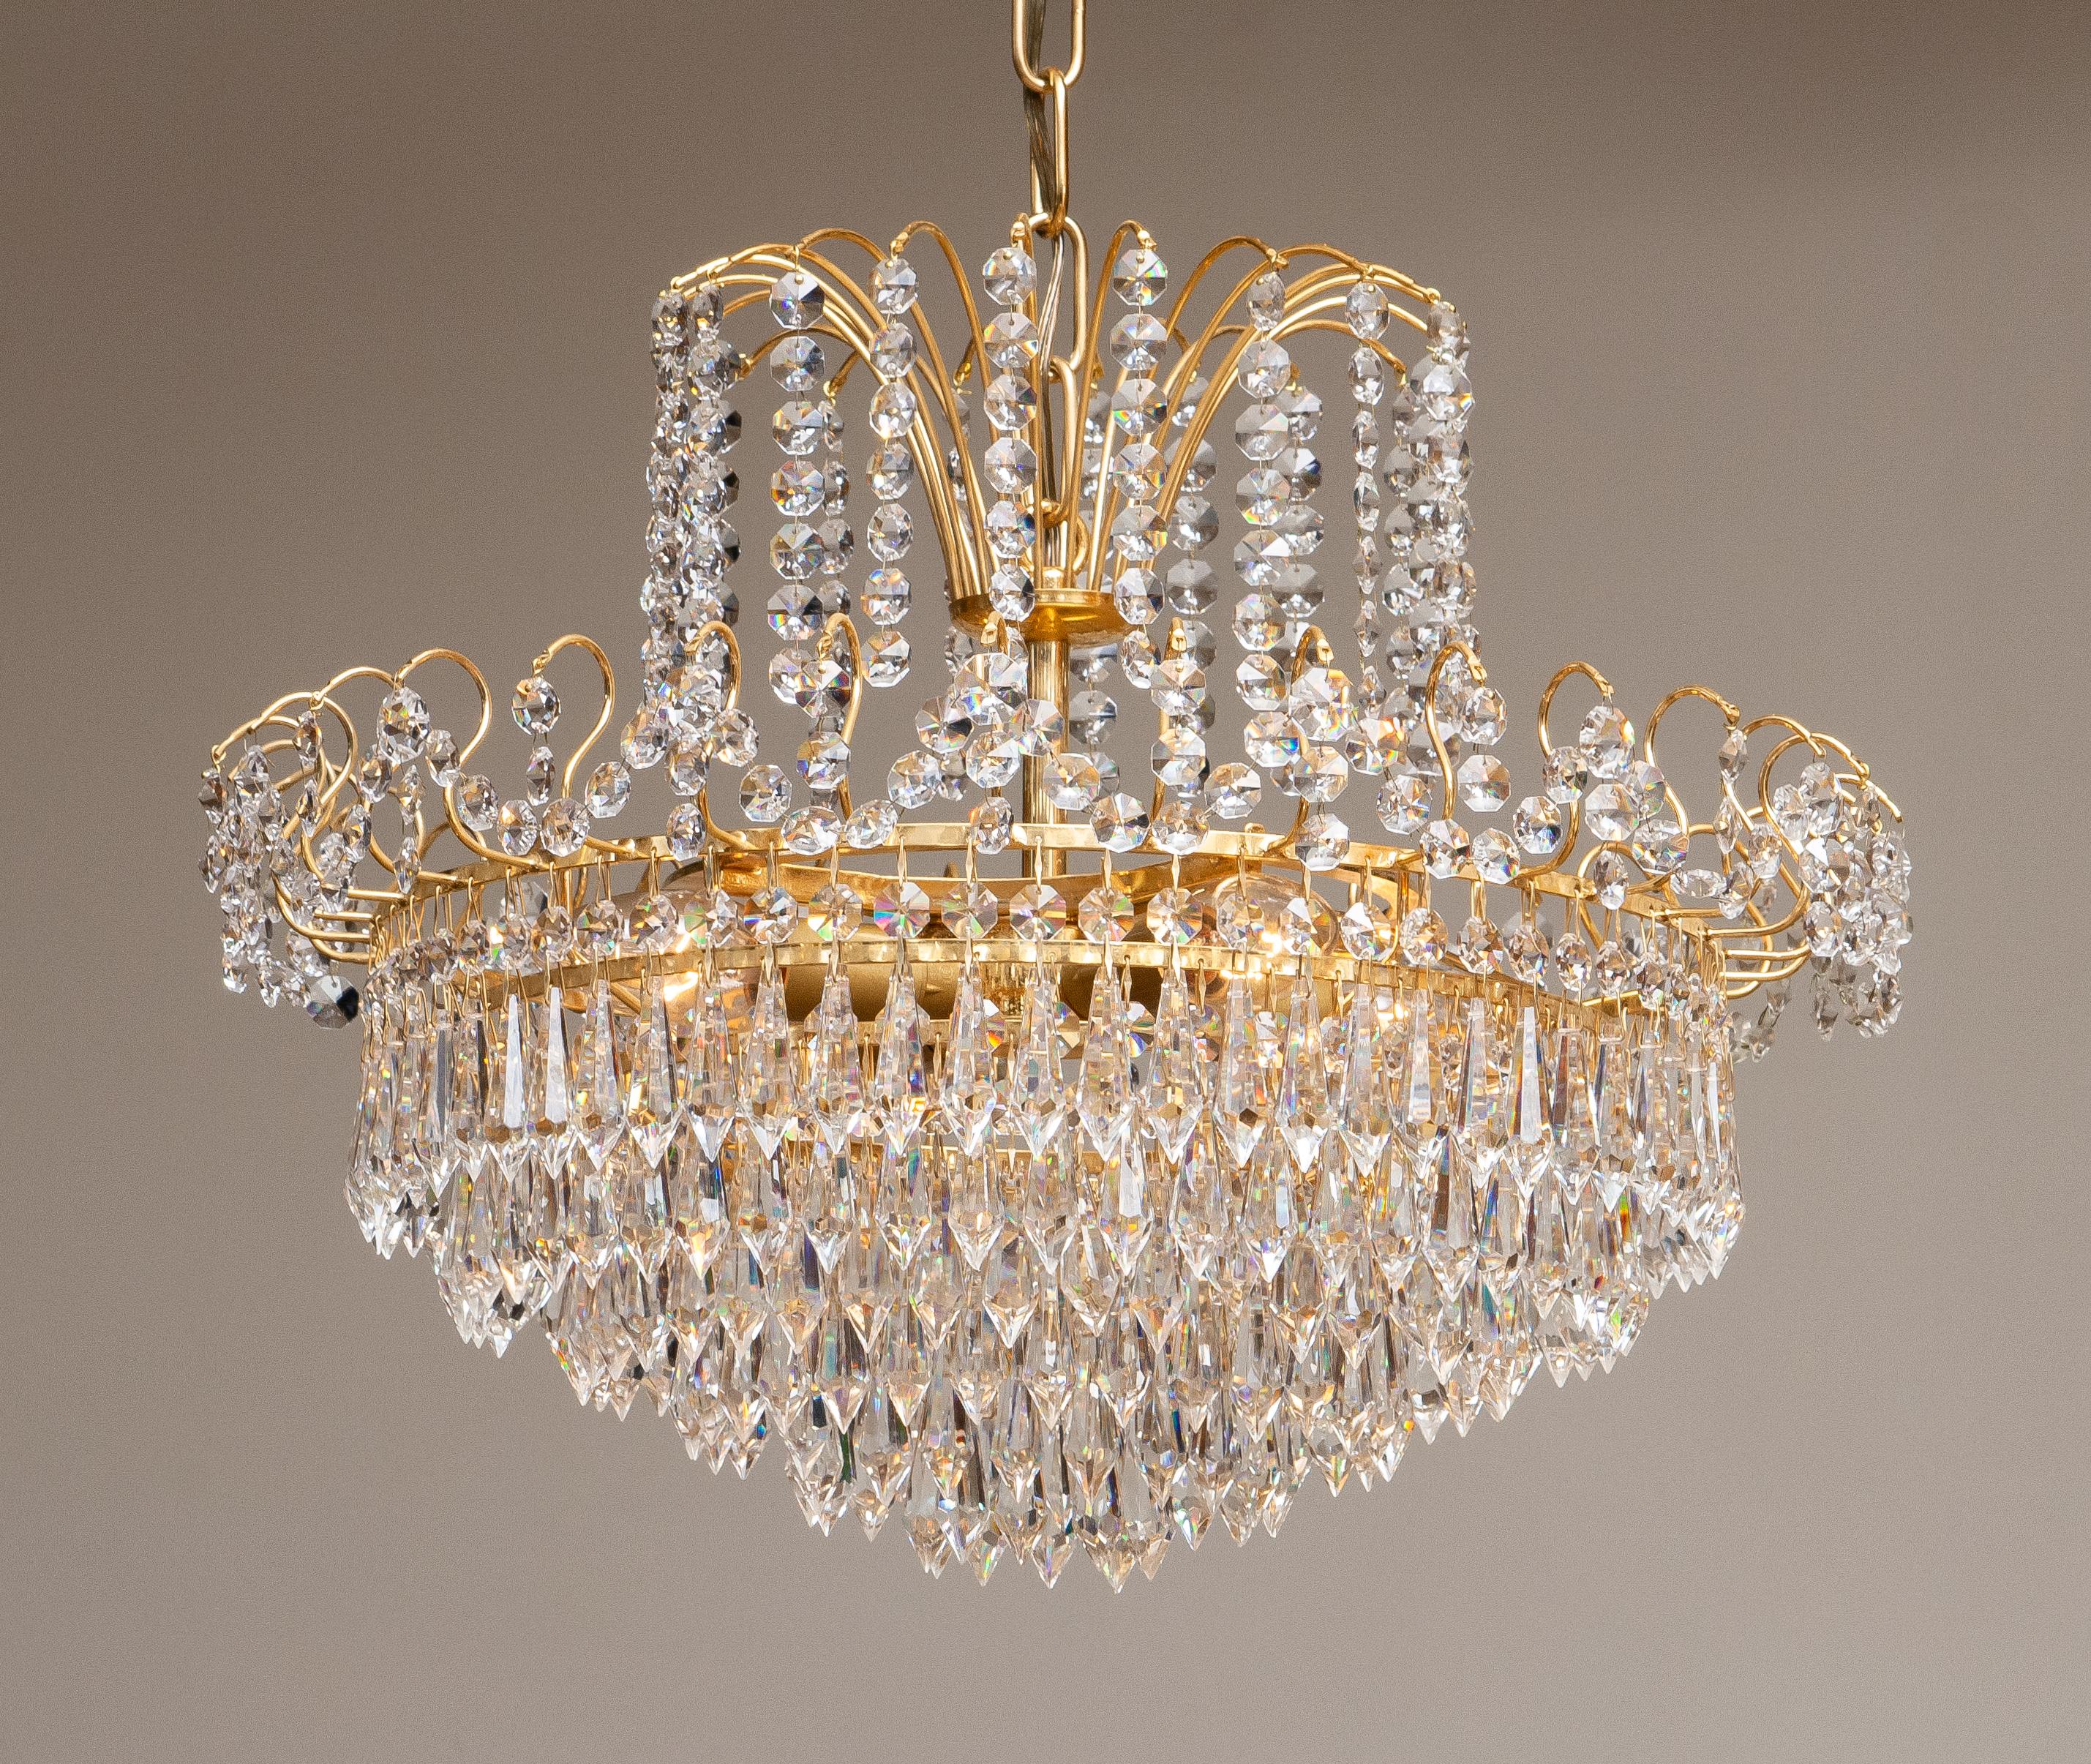 Beautiful gold-plated chandelier attributed to Rejmyre Armaturfabrik Rejmyre, Sweden, 1970s.
The chandelier is build up out of six rings and two crowns filled with faceted crystal, total diameter of the fixture is 44cm or 17